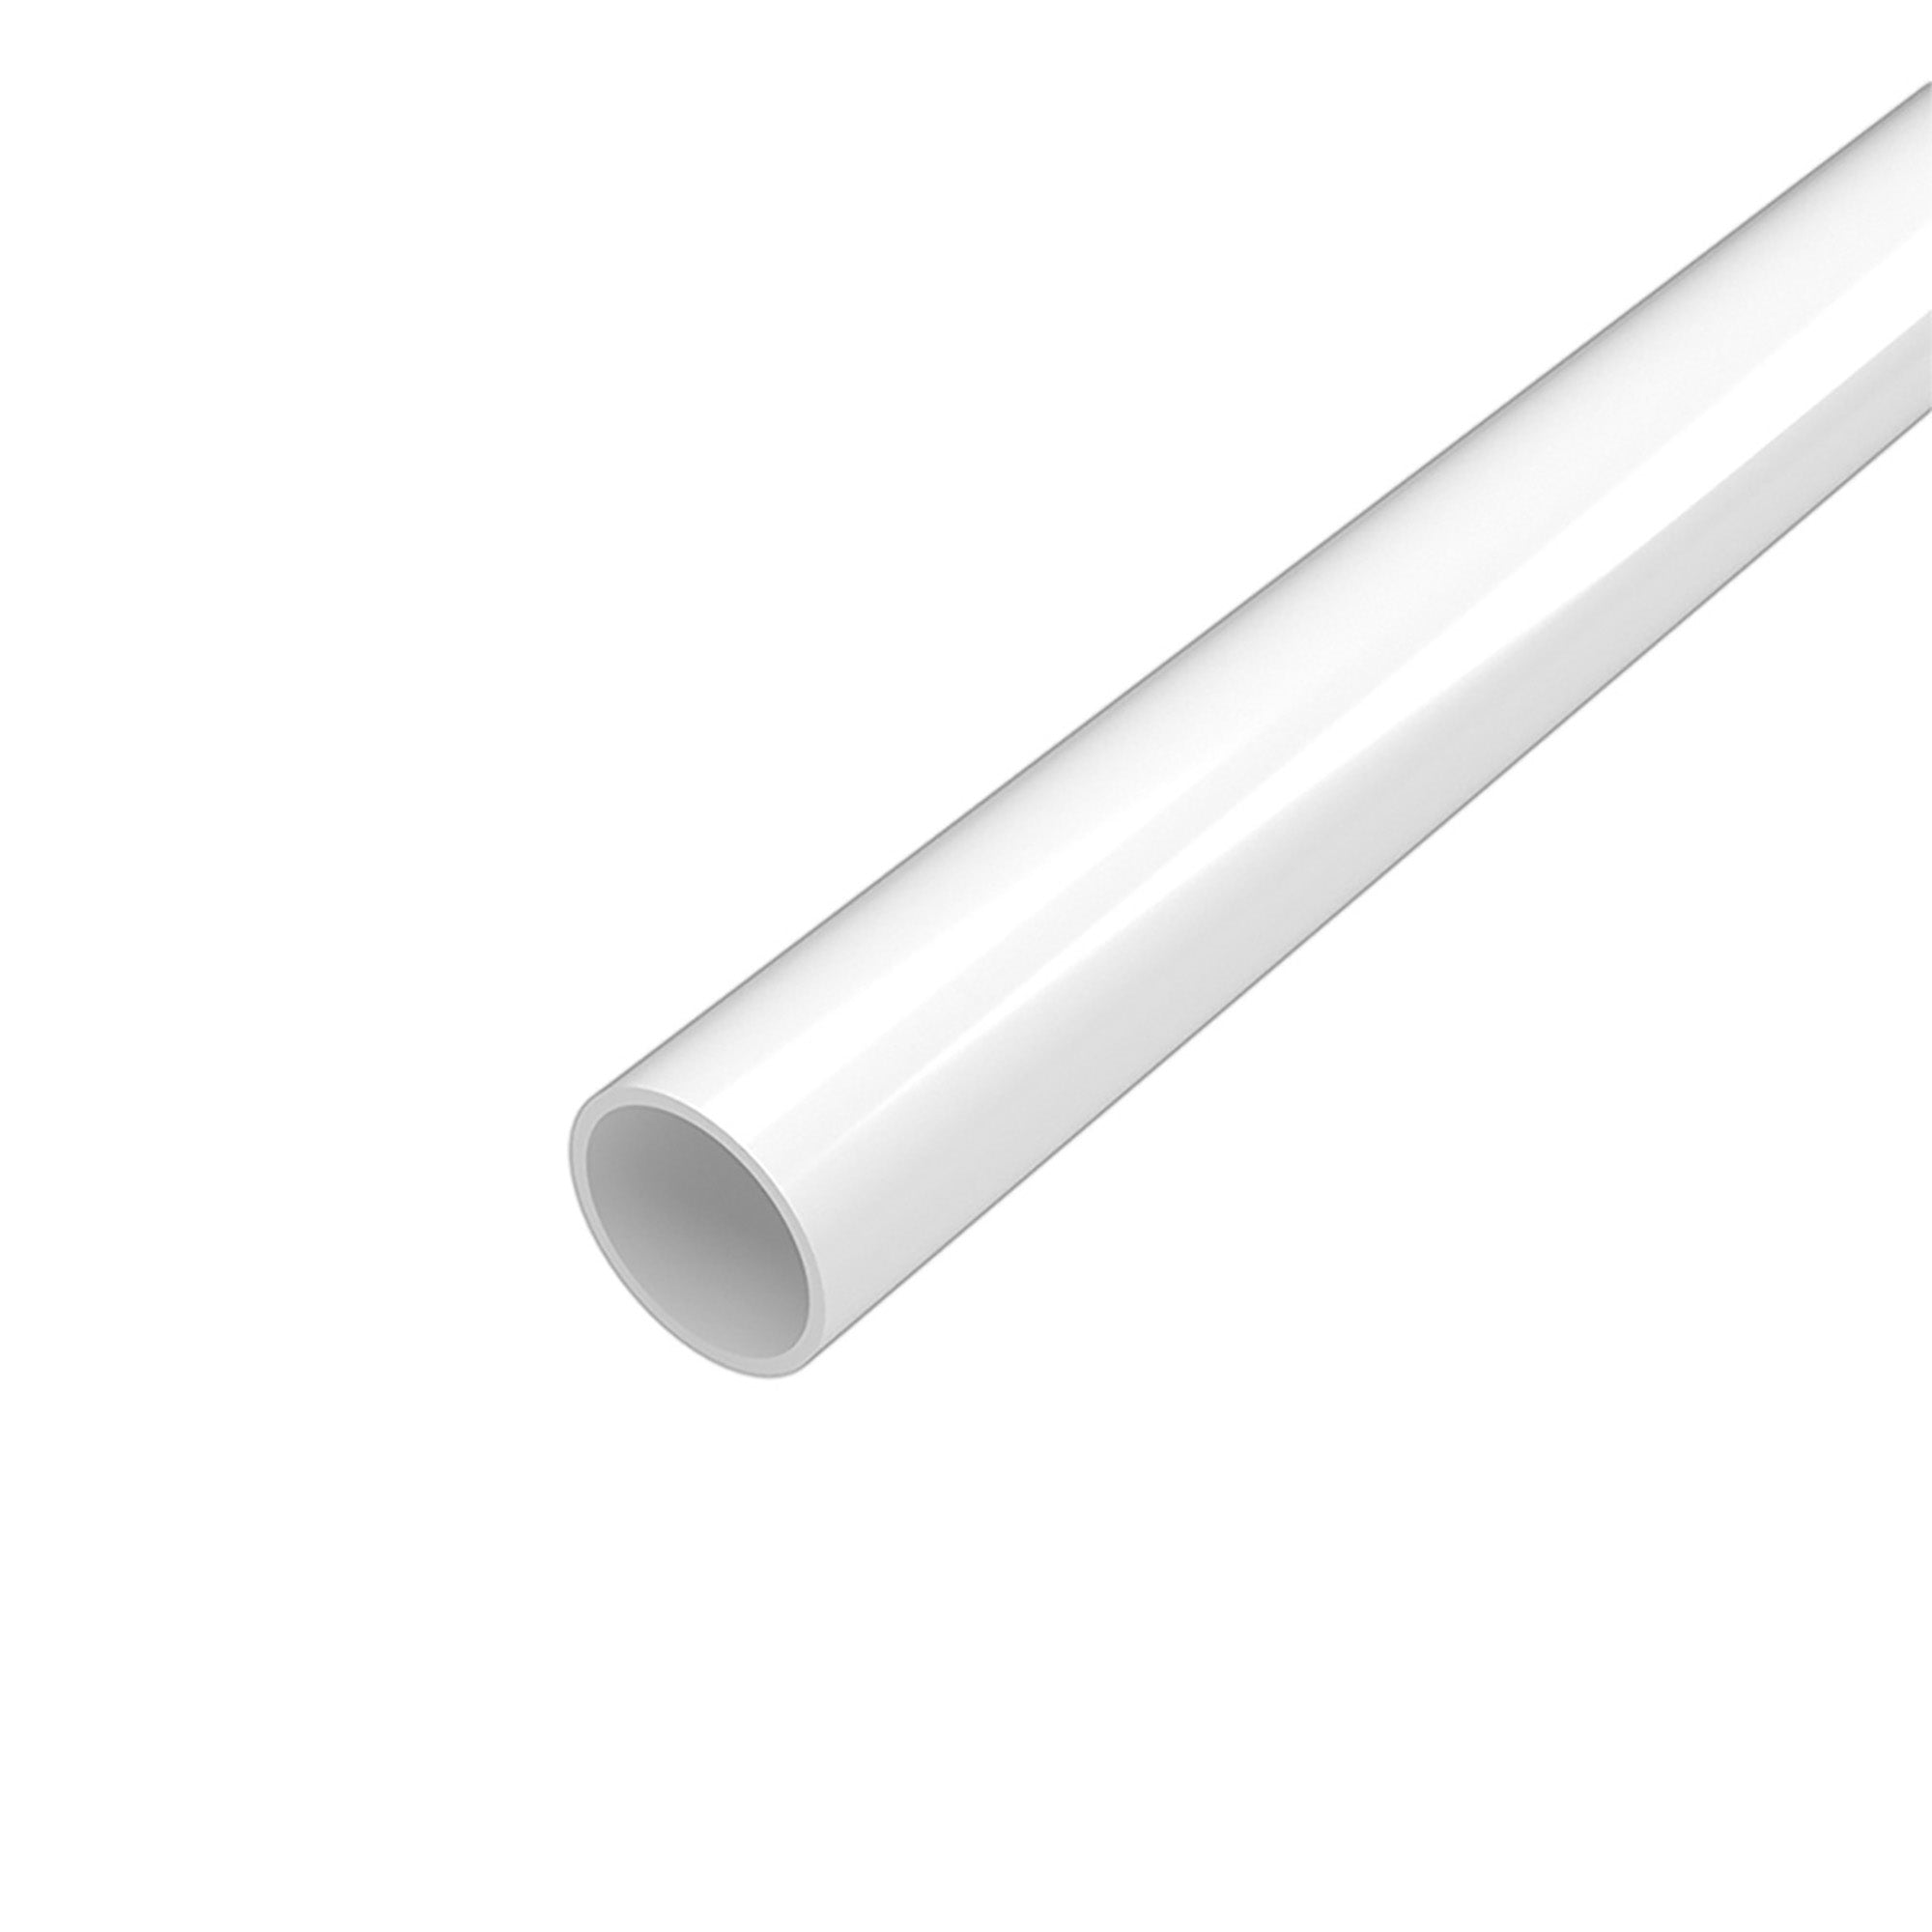 PVC Pipe for WAC Landscape Lighting 1